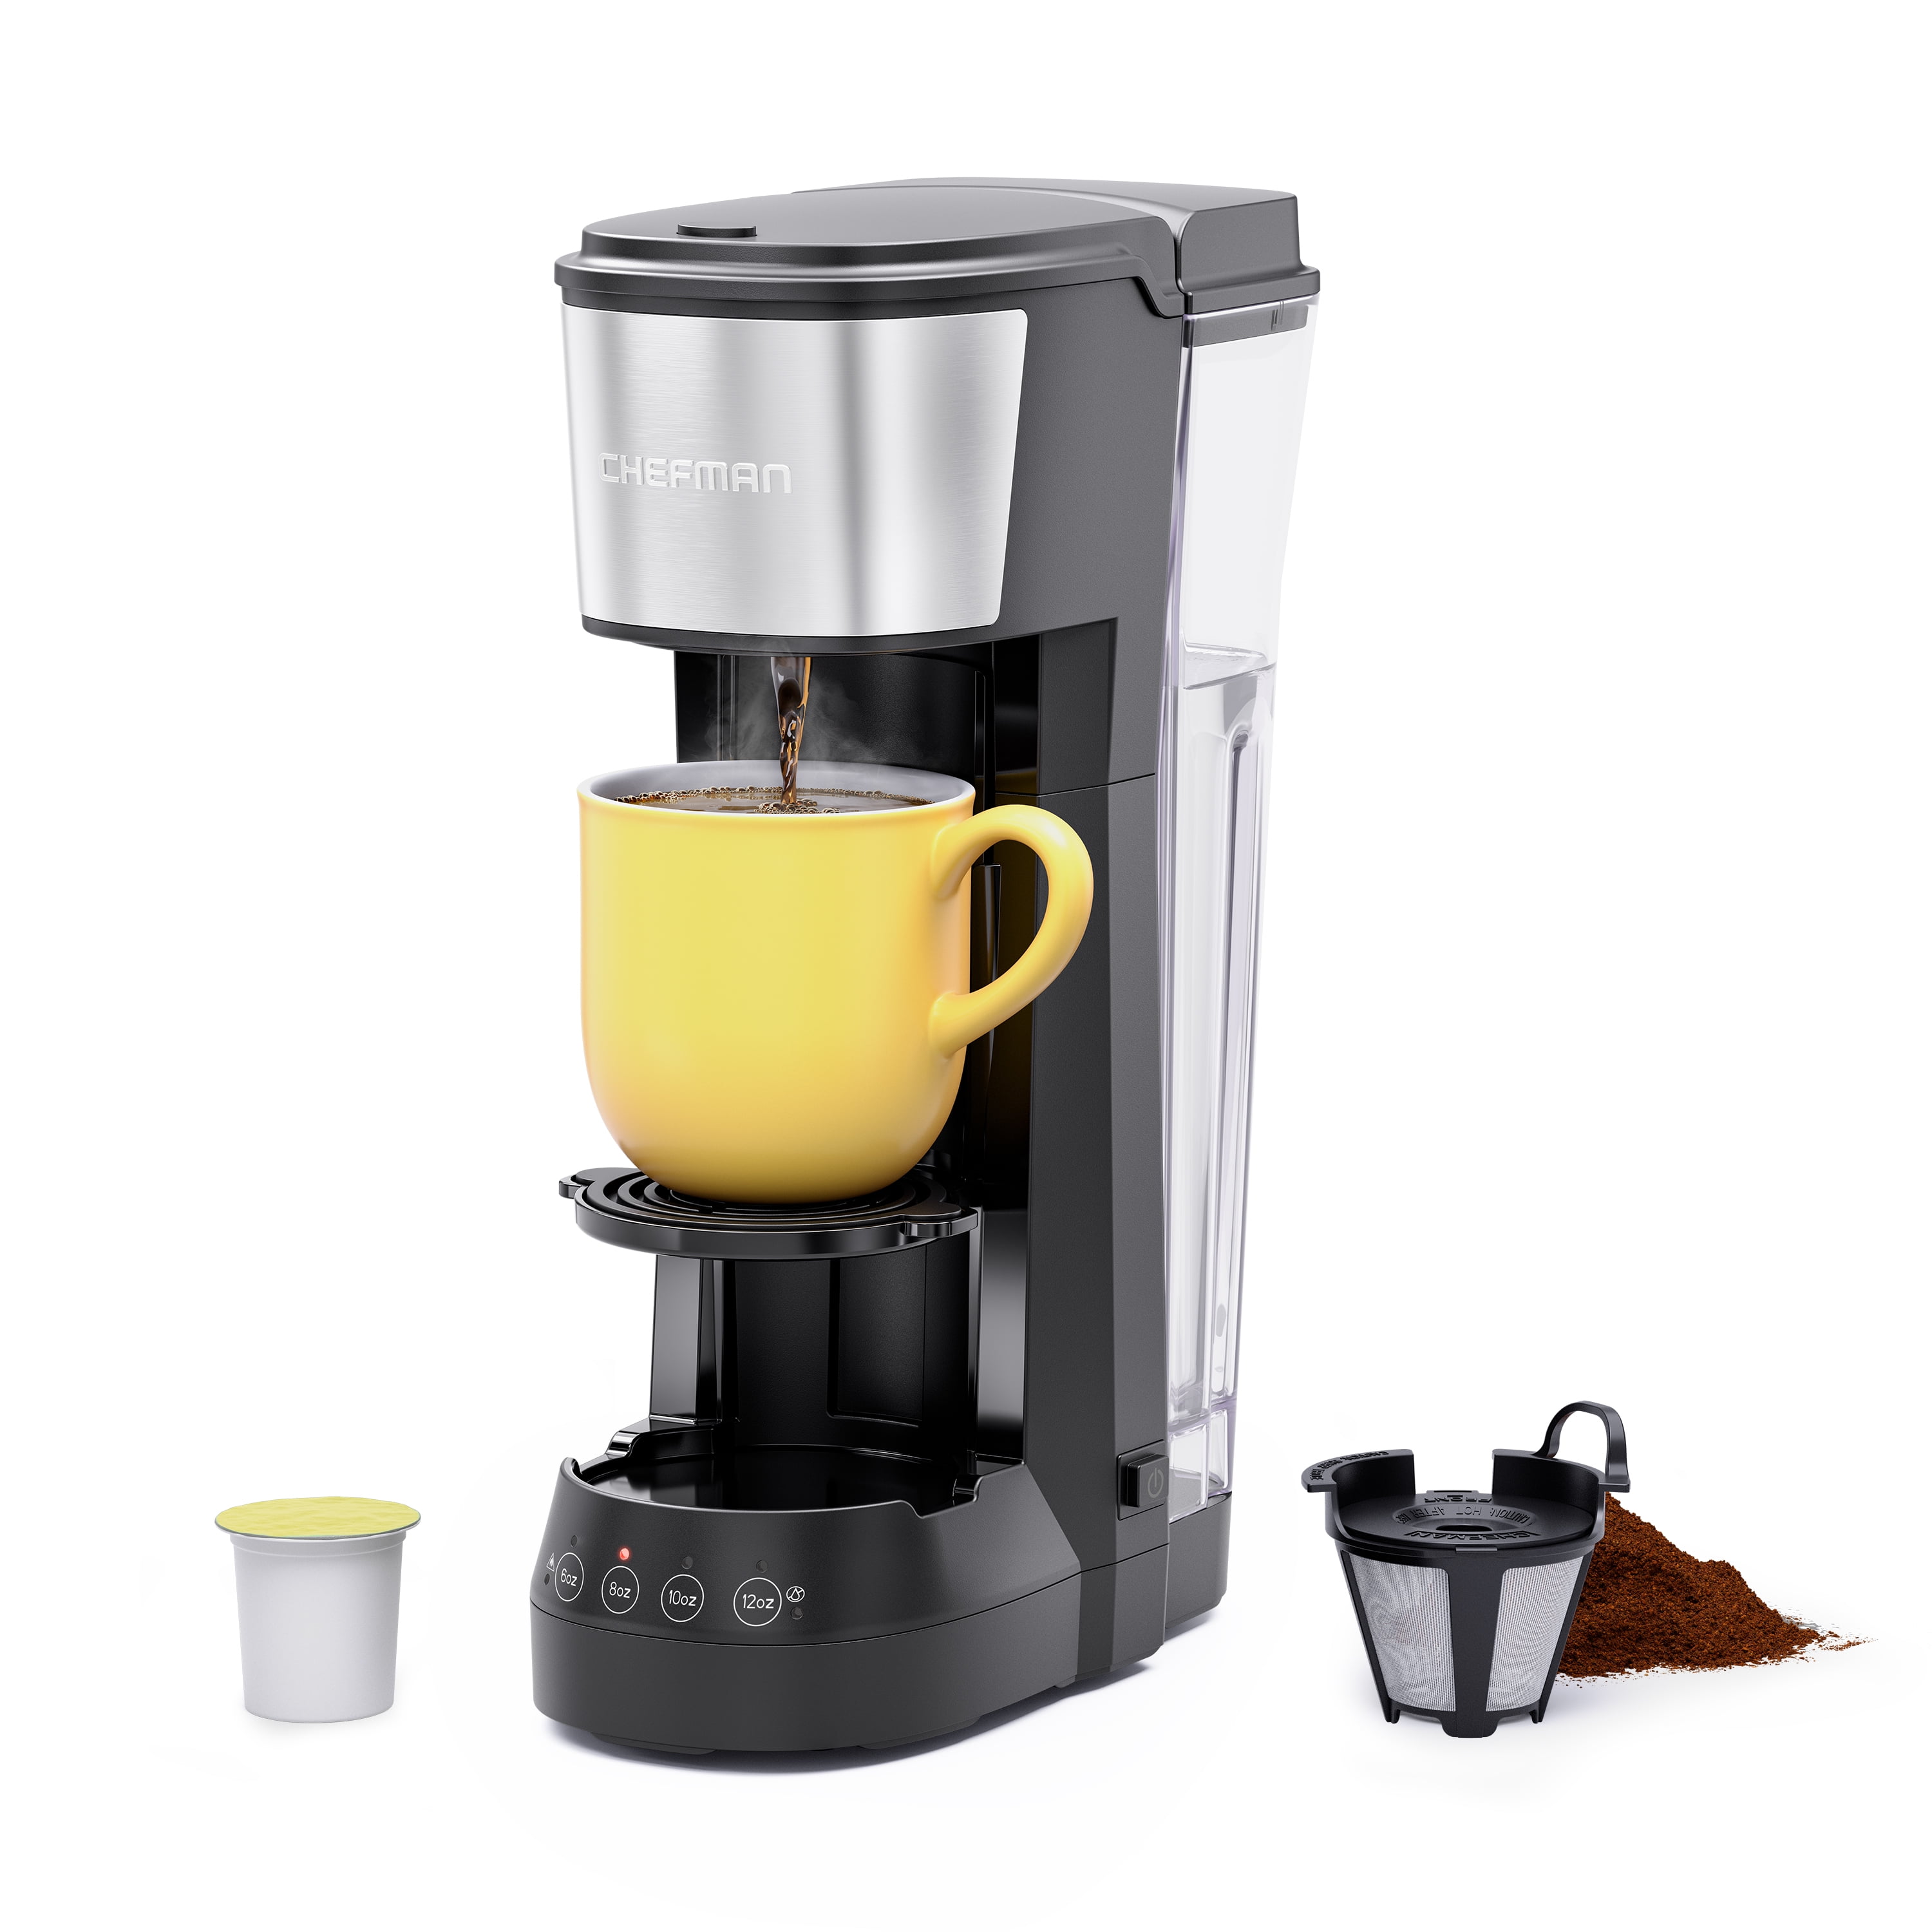 KINGTOO Coffee Maker with Milk Frother, Single Serve Coffee Maker